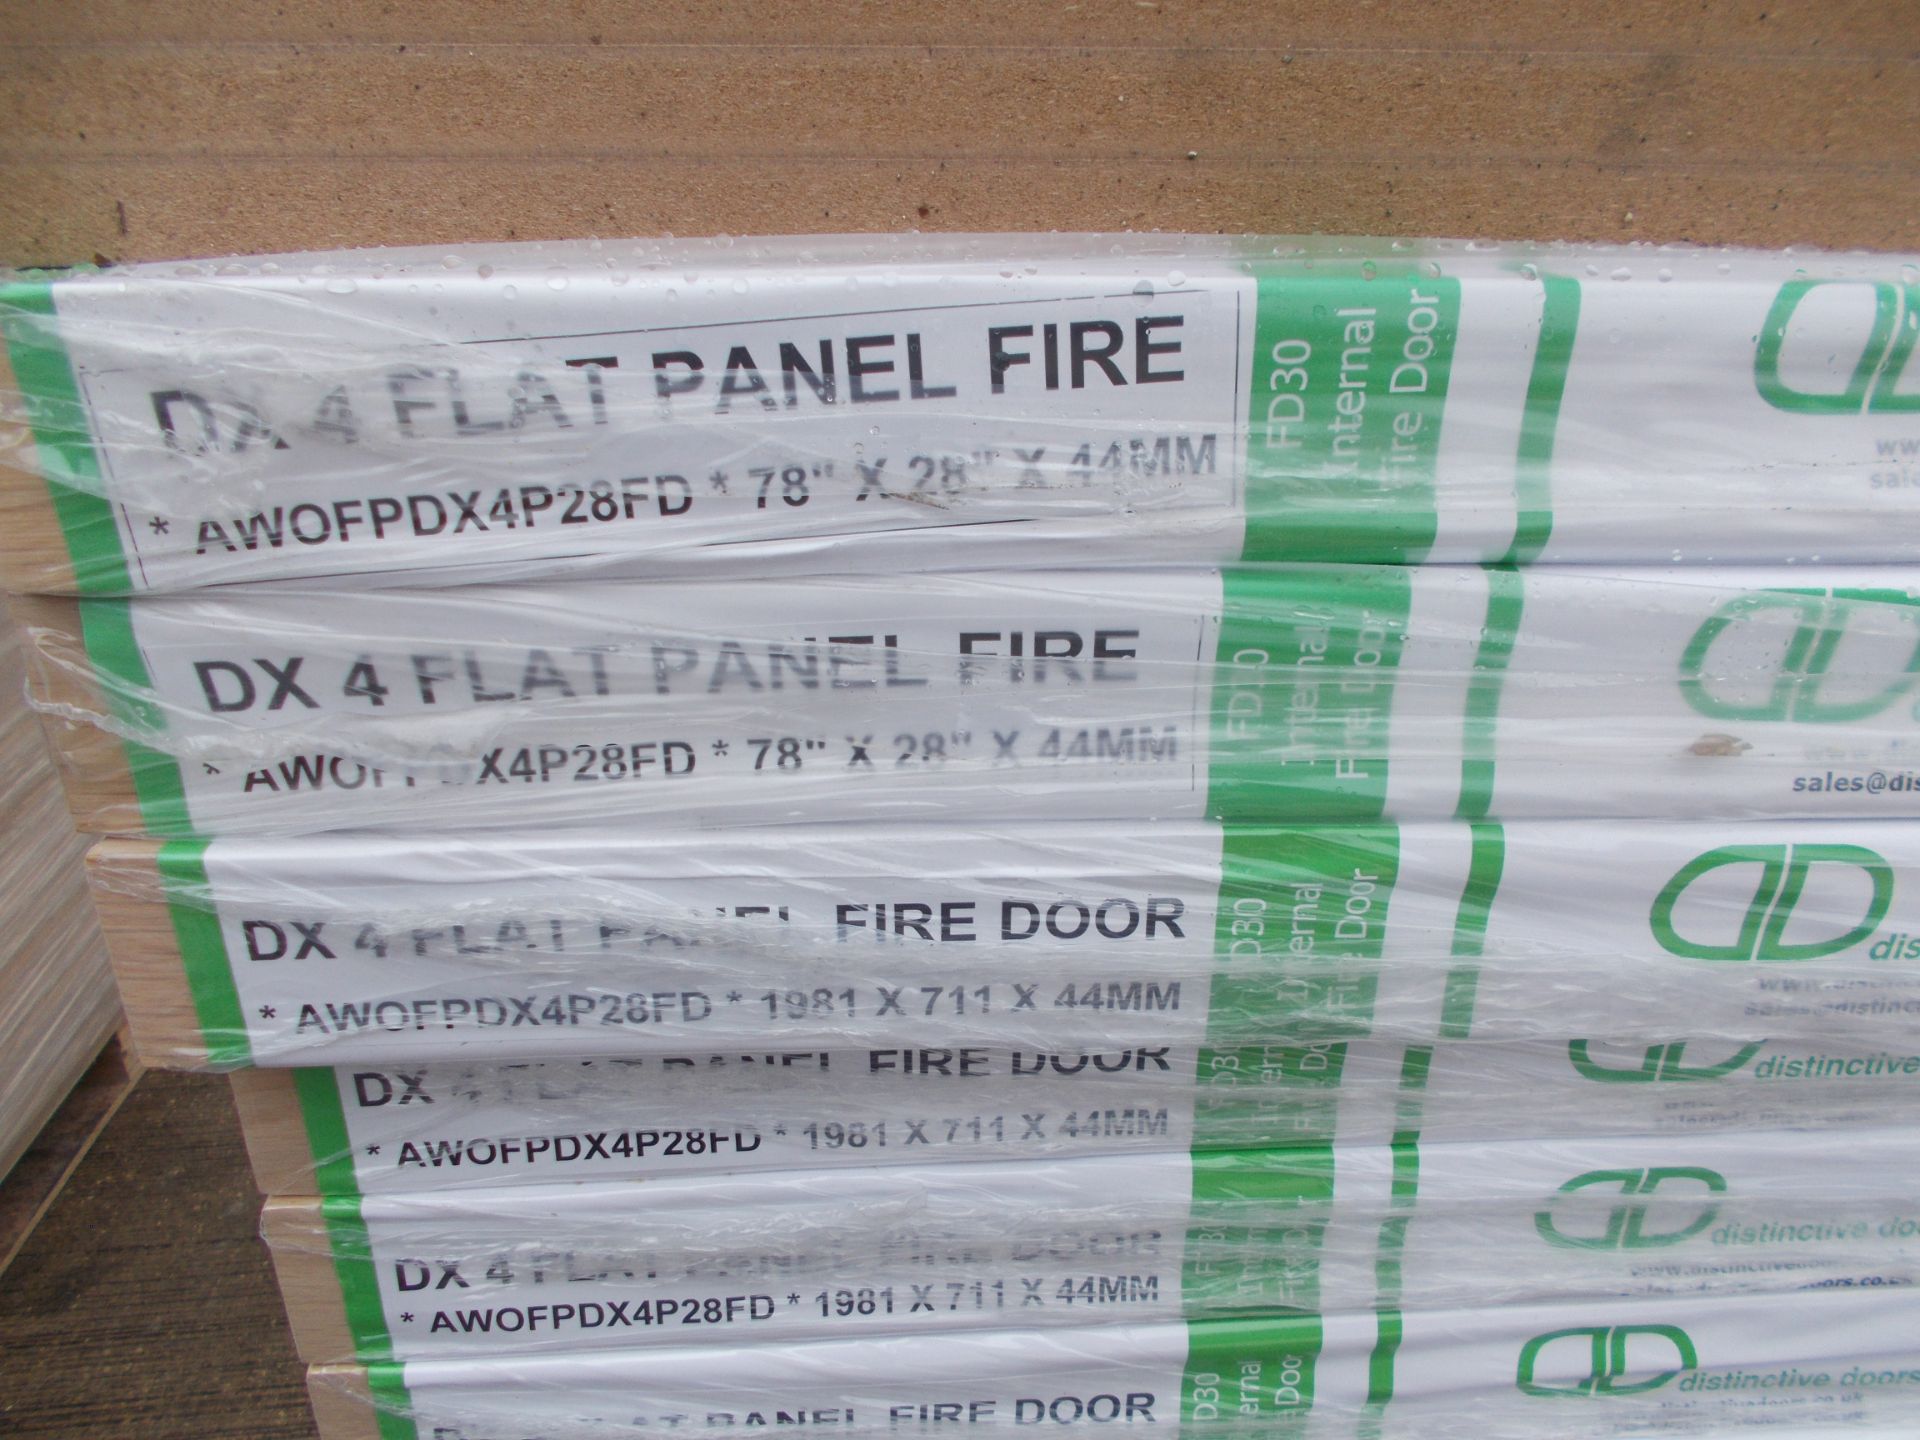 4 x DX 4 Flat Panel Internal Fire Doors AWOFPDX4P28FD 1981x711x44mm - Lots to be handed out in order - Image 3 of 3